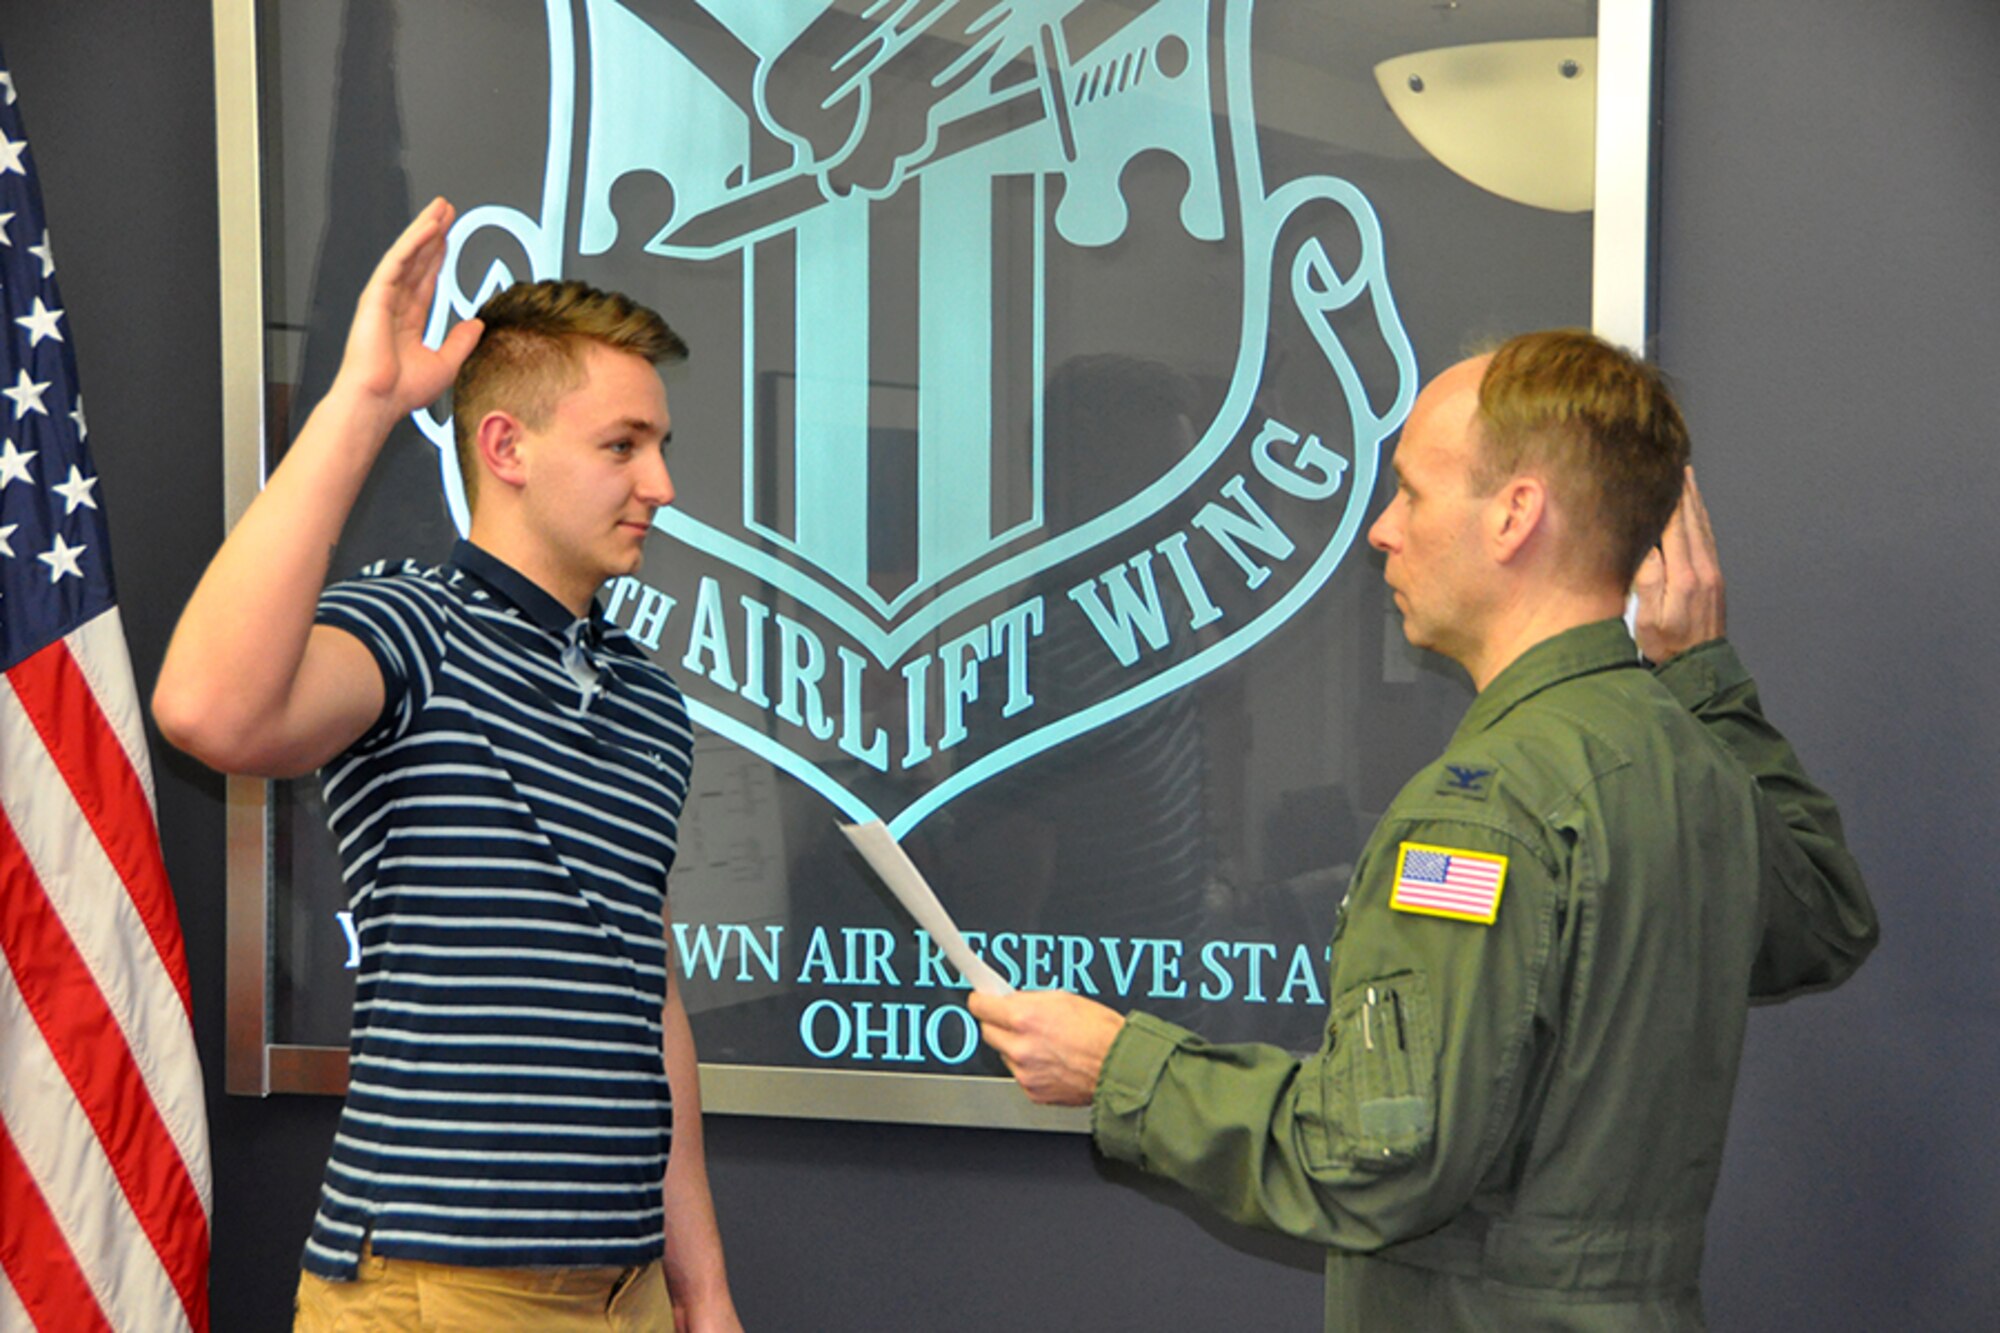 Robert Adler, a new recruit to the 910th Security Forces Squadron, holds an Air Force Reserve sign after taking the oath of enlistment to become a Reserve Citizen Airmen here, Jan. 29, 2018.